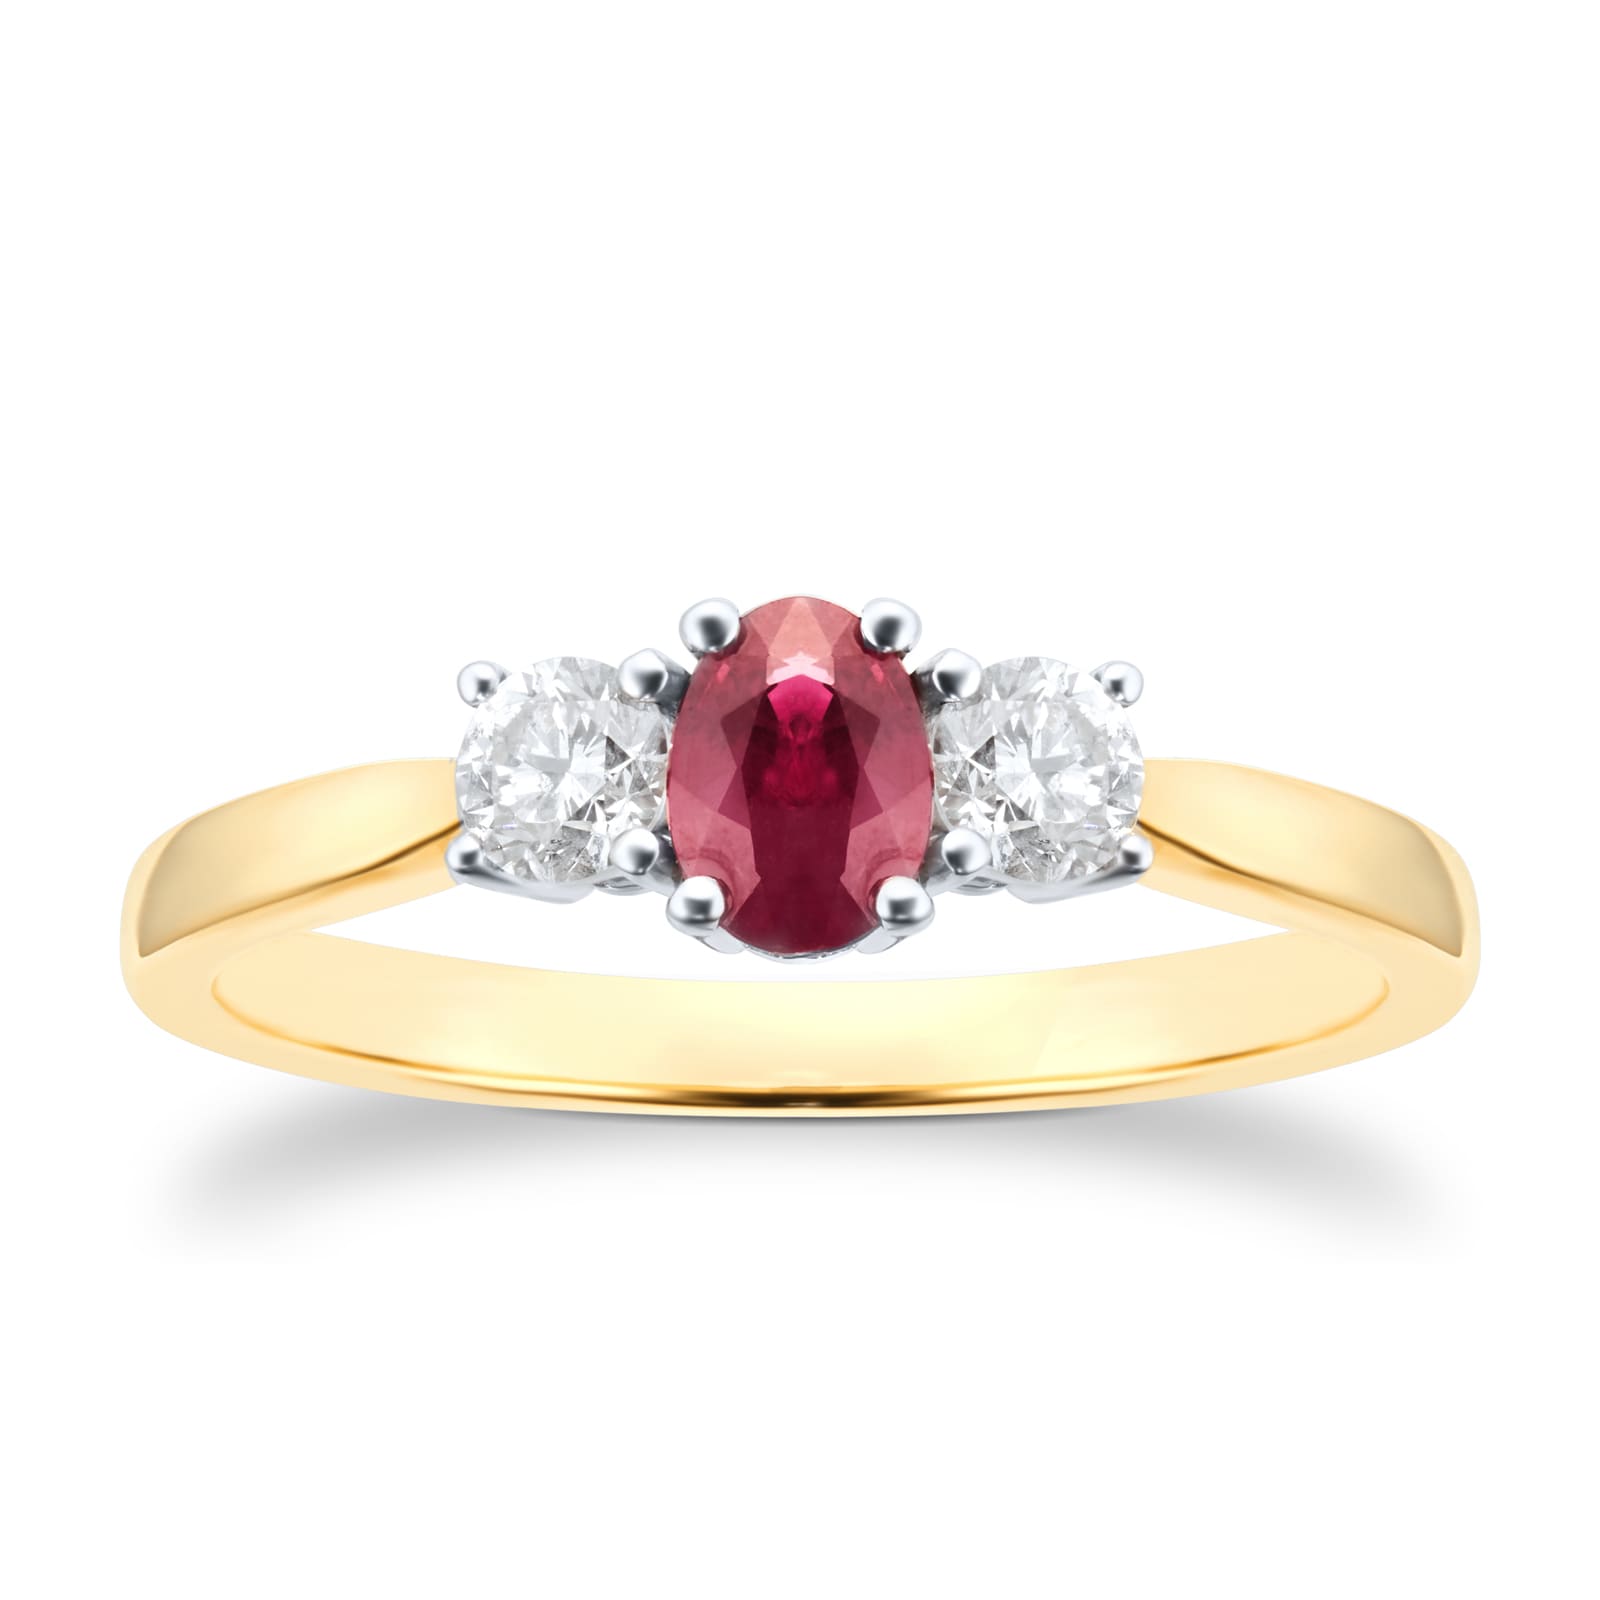 9ct Yellow and White Gold 3 Stone Ruby & Diamond Ring - Ring Size I.5